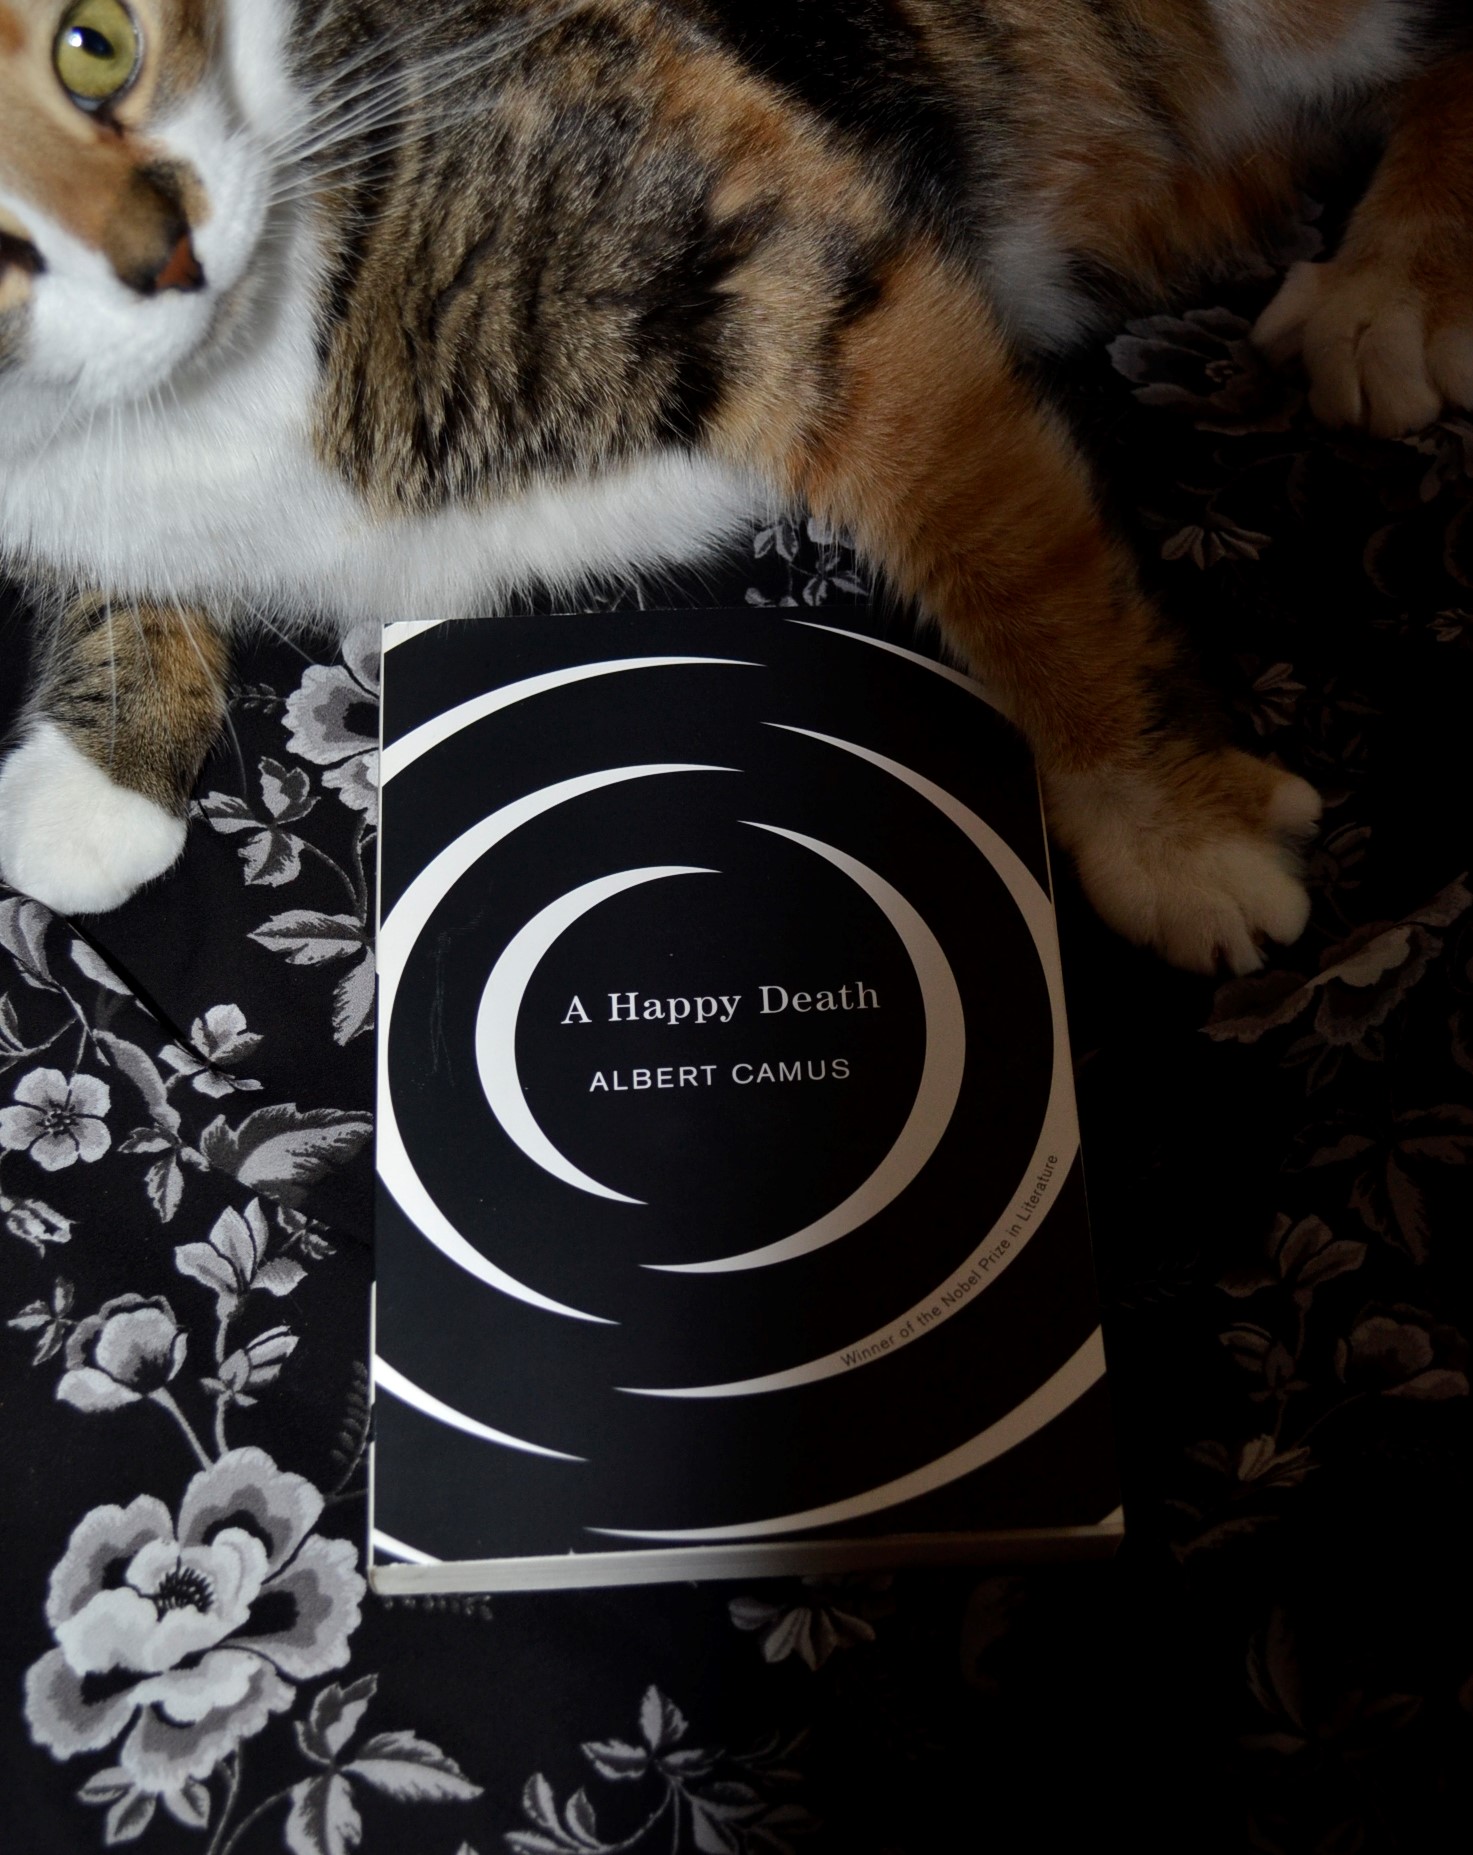 The black and white cover of A Happy Death on a black and white floral background beside a calico tabby.